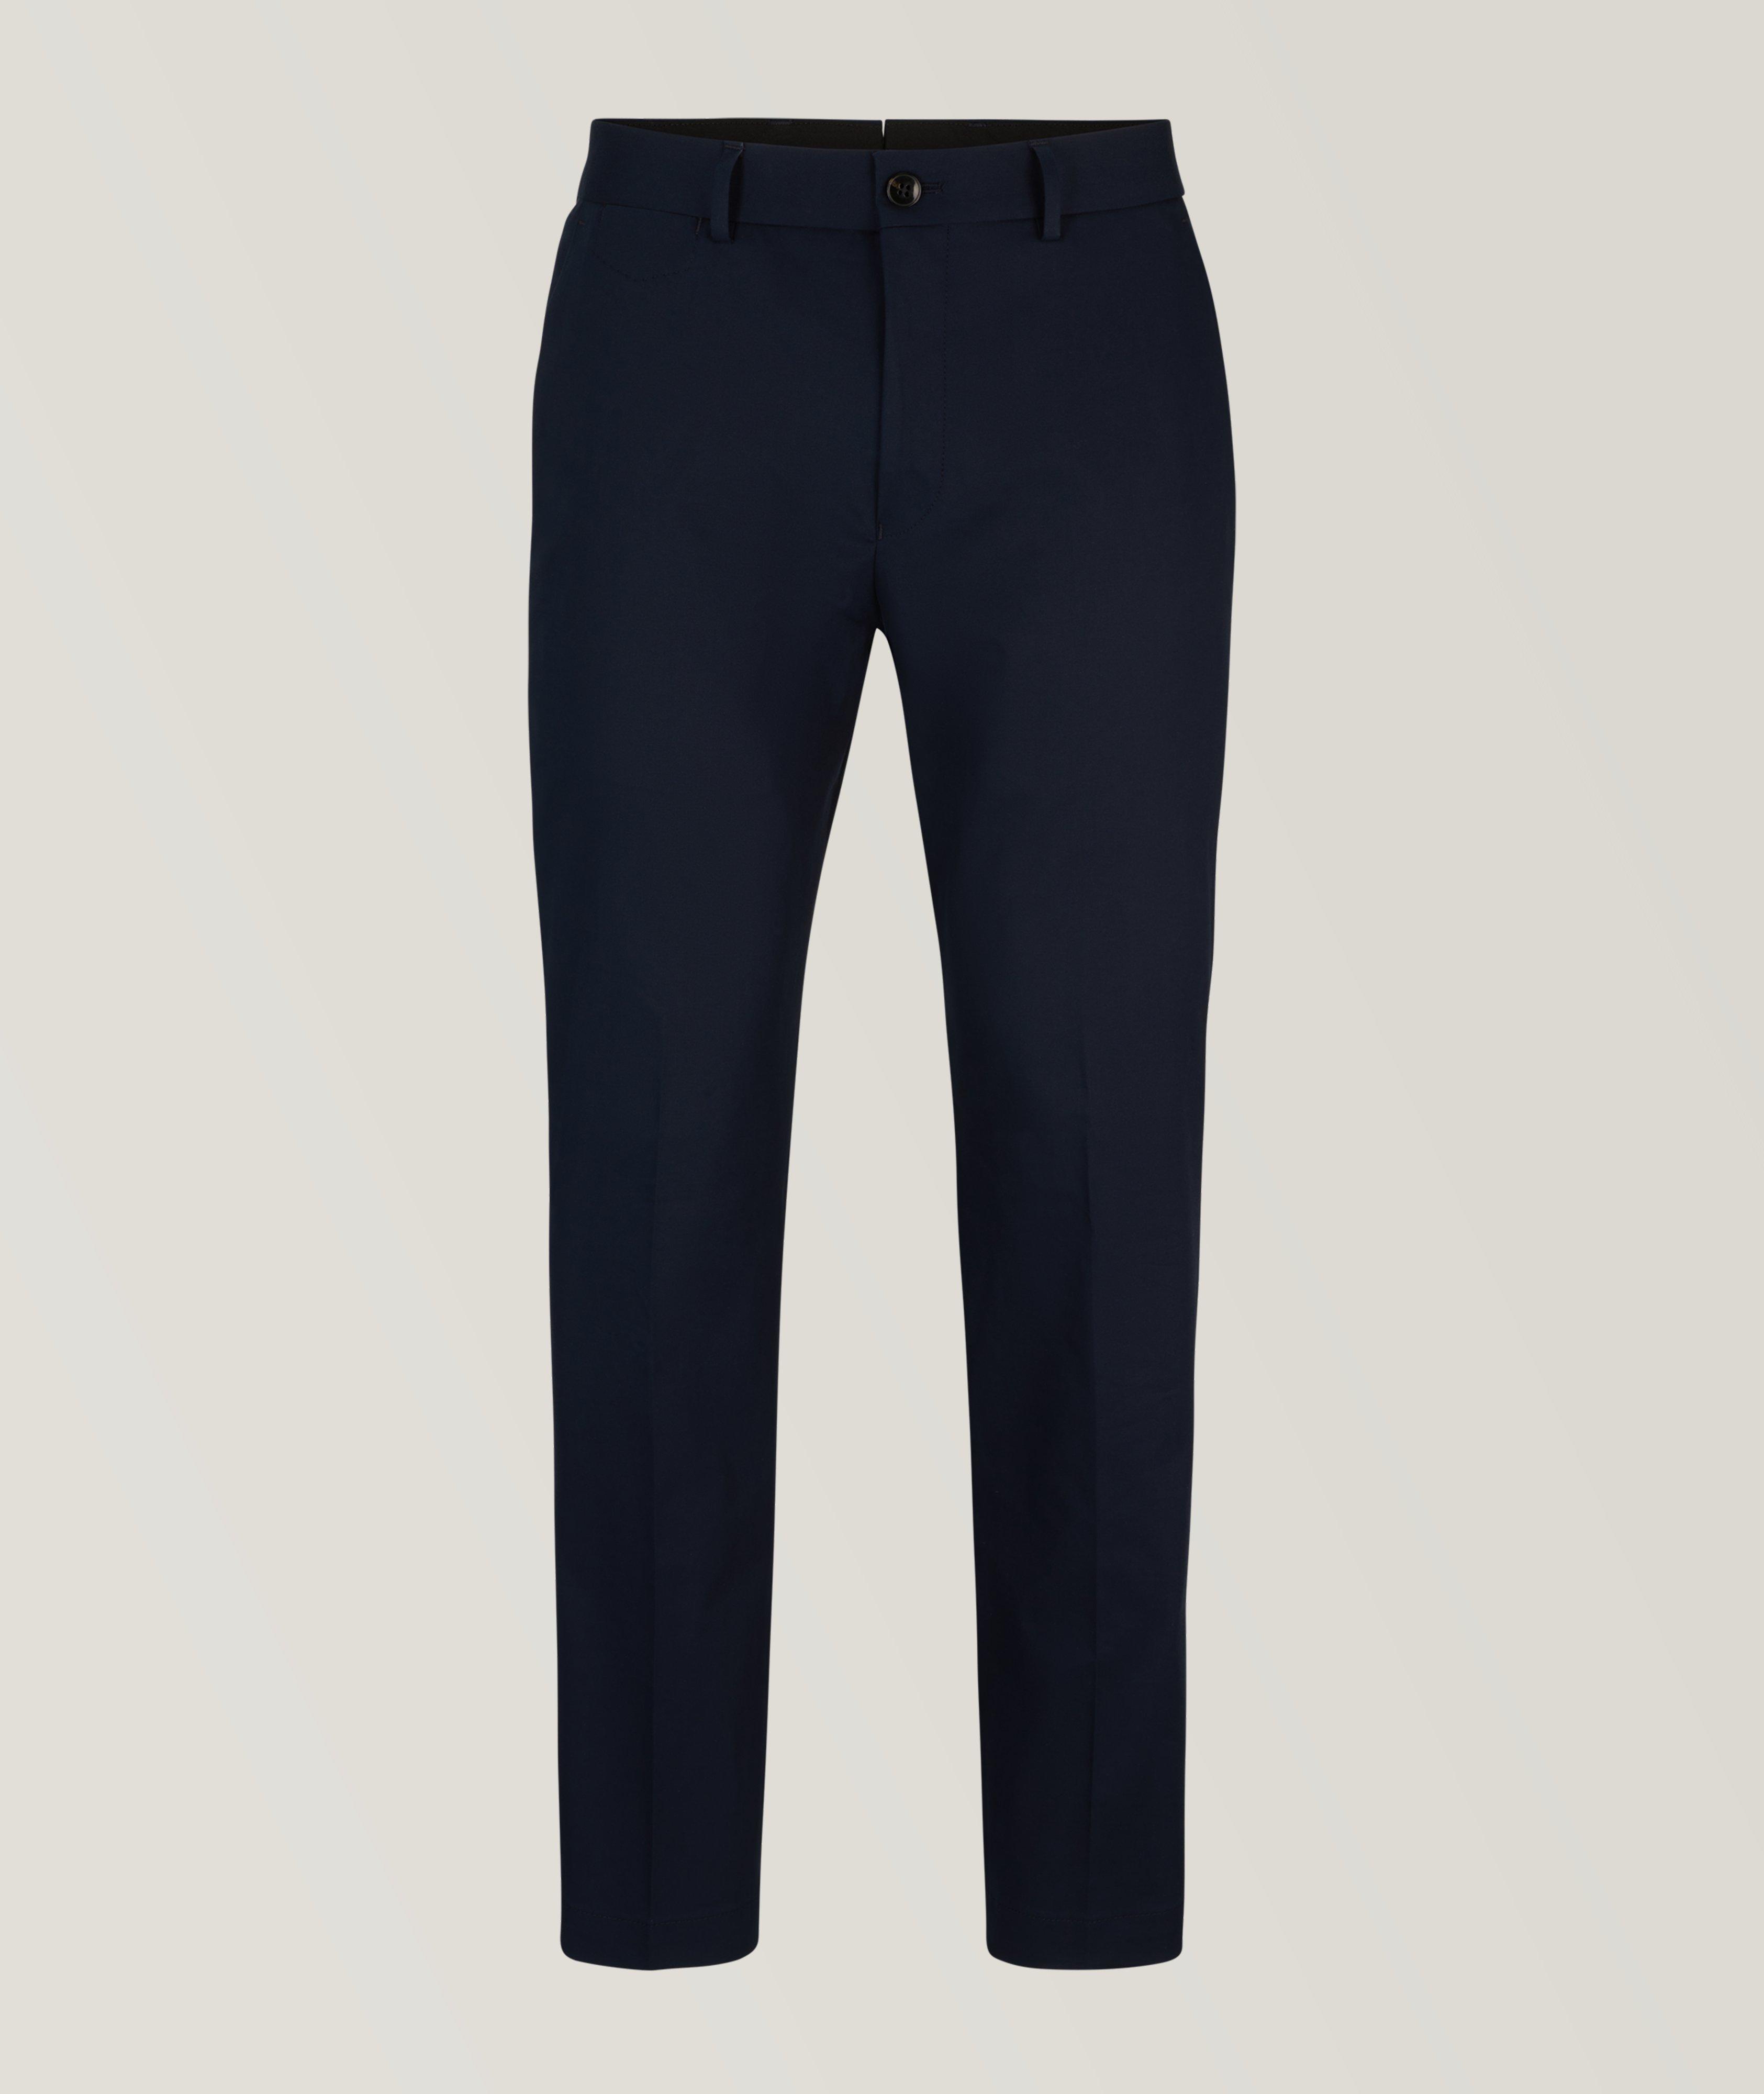 Slim-Fit Stretch-Cotton & Silk Trousers image 0